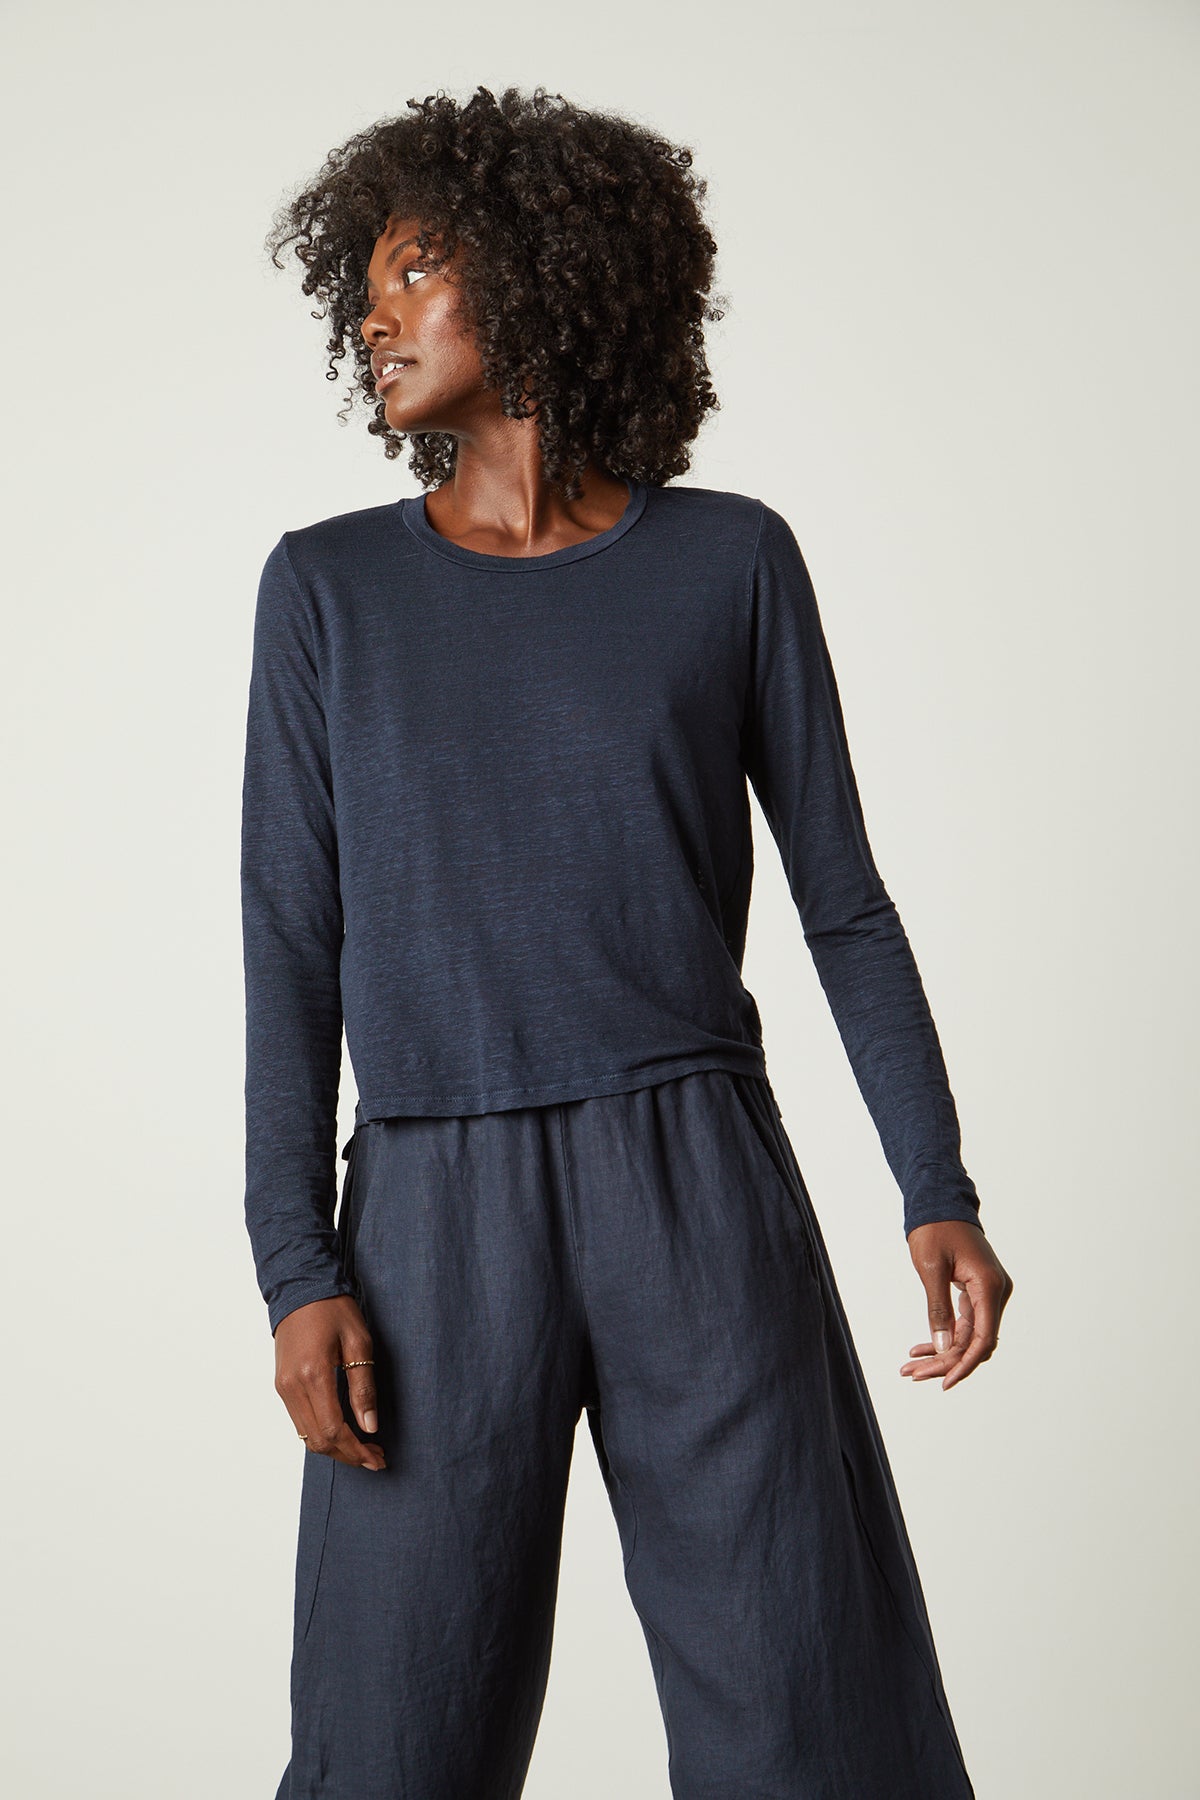 The model is wearing a lightweight KARA CREW NECK TEE and wide-leg pants from Velvet by Graham & Spencer.-26022696812737